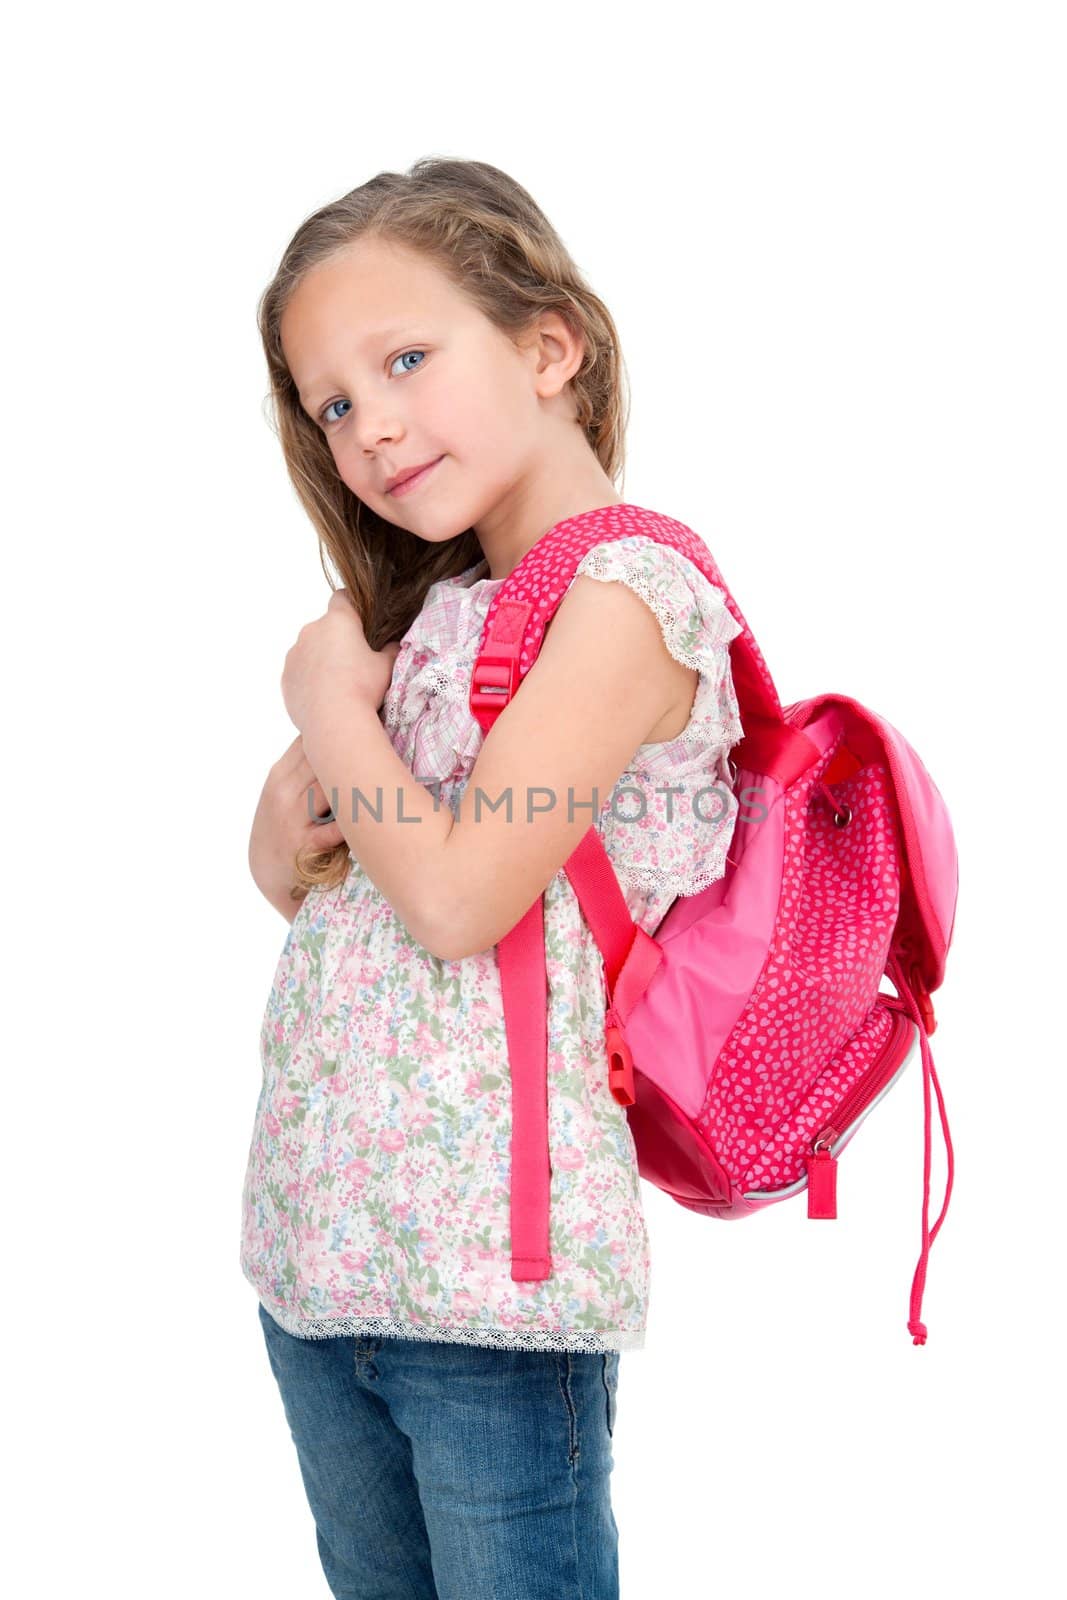 Young student with school bag. by karelnoppe